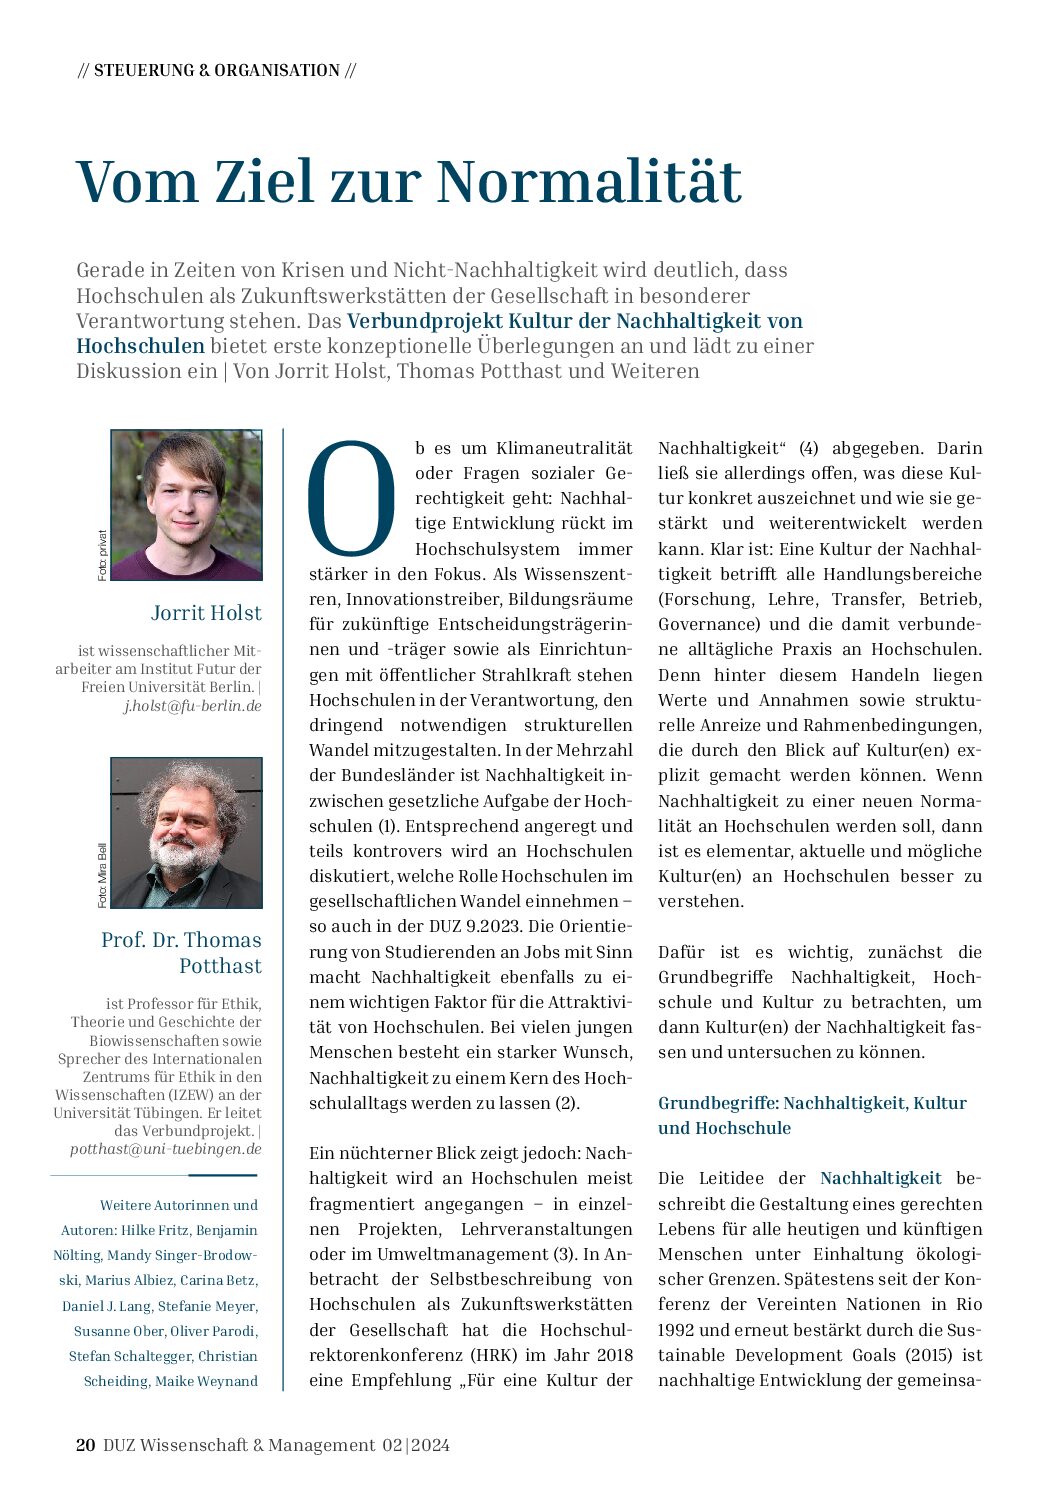 The first page of the guest article in DUZ Wissenschaft & Management, 02/2024